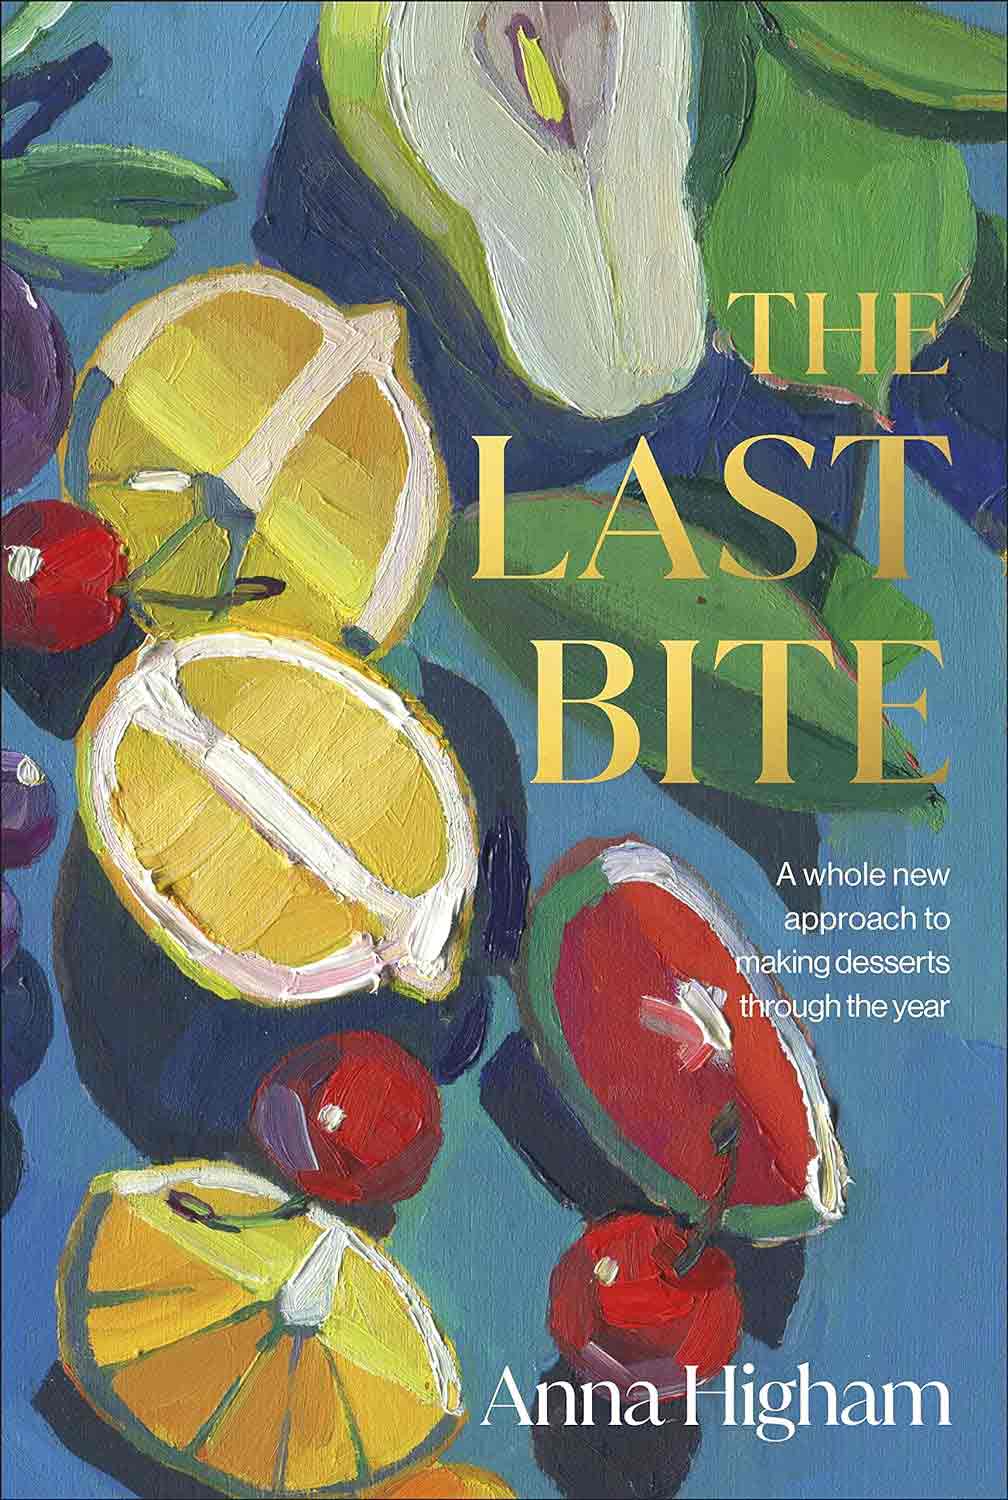 Last Bite by Anna Higham book cover